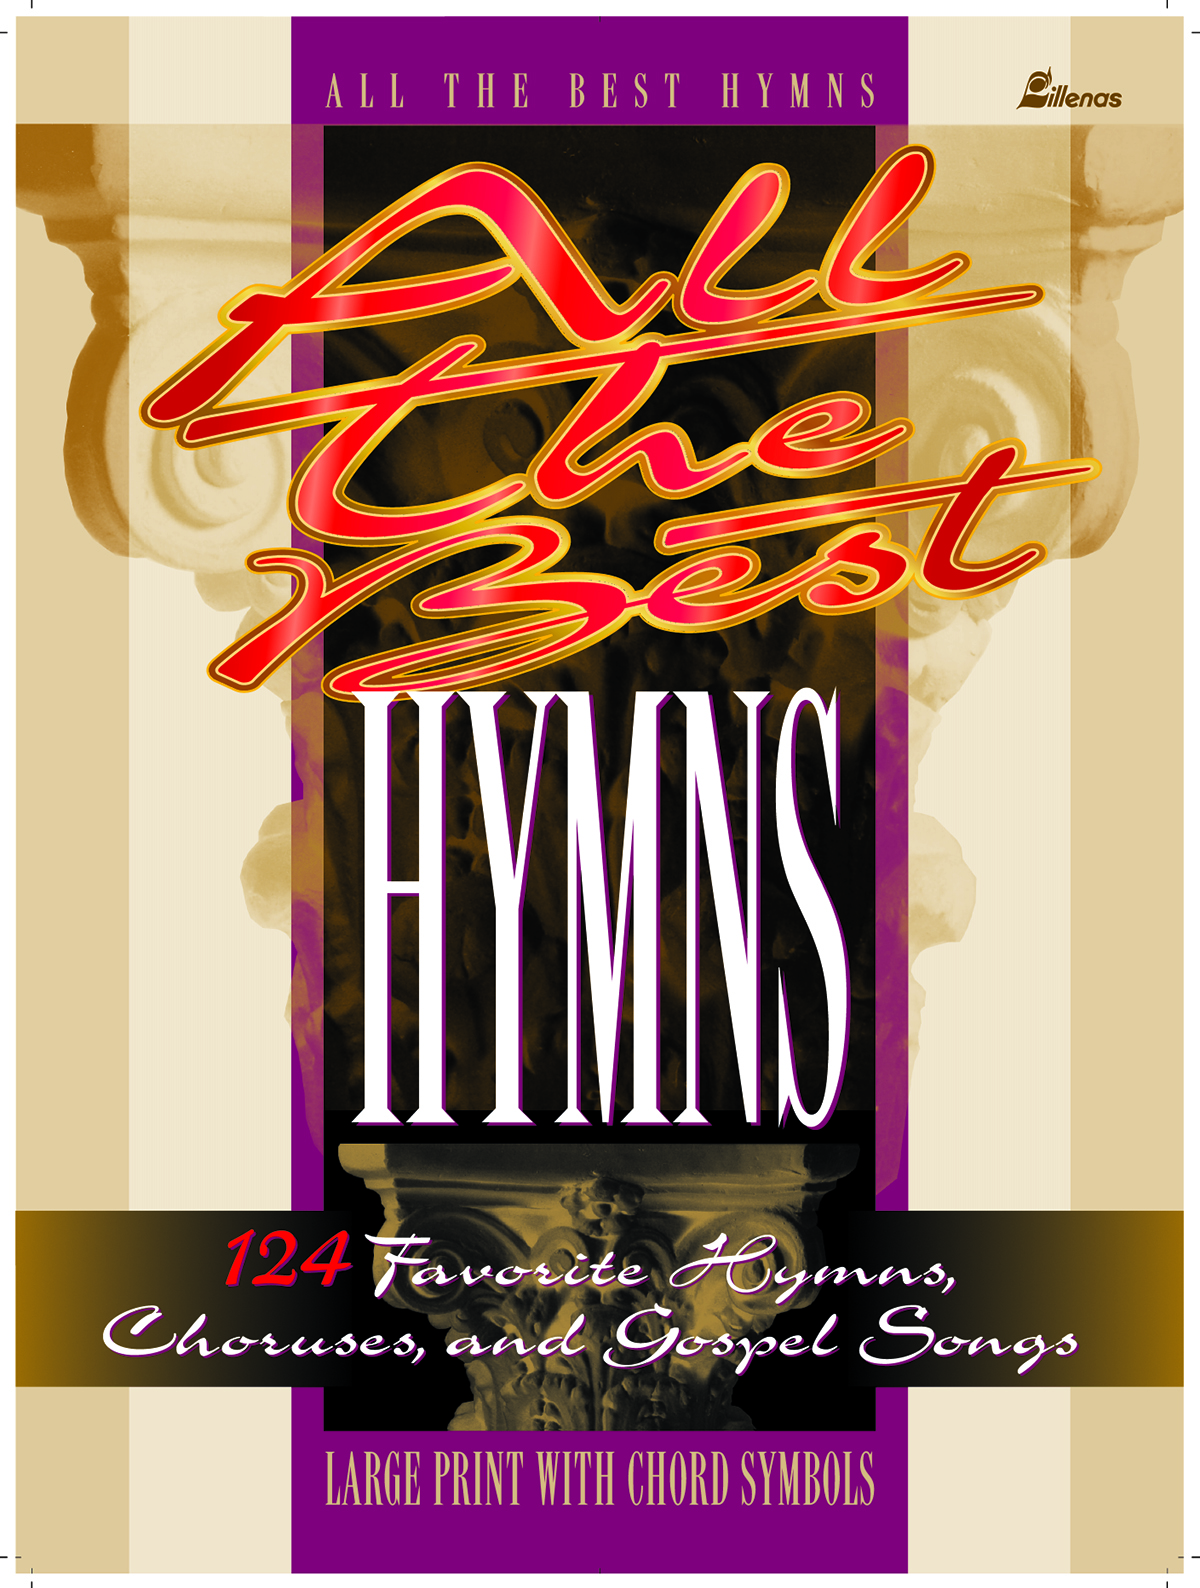 All the Best Hymns